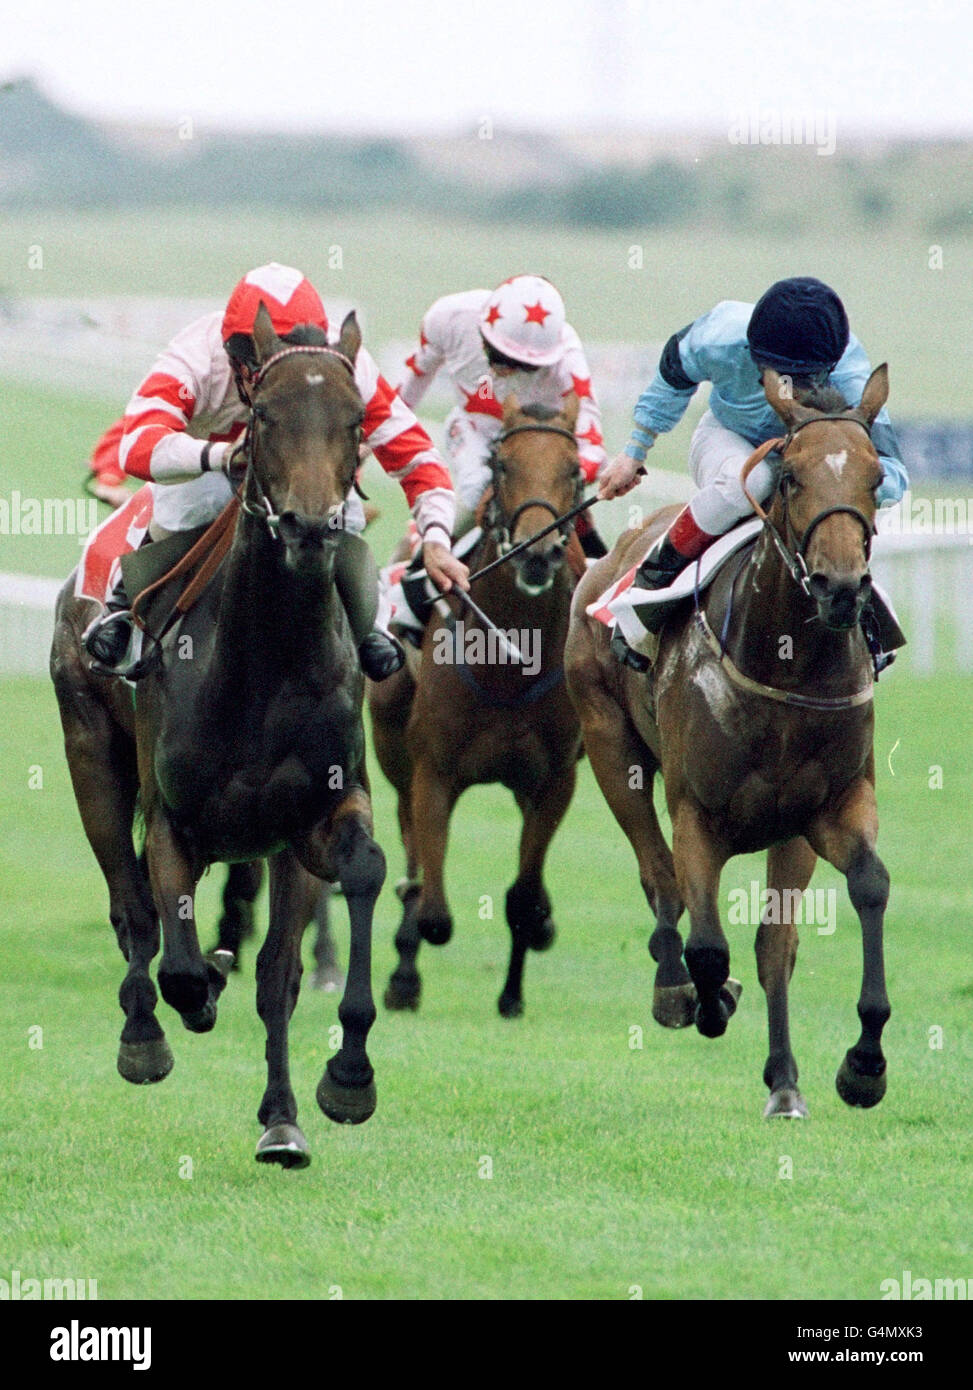 Torgau (L), ridden by Gary Stevens, winning the Charles Heidseick Champagne Cherry Hinton Stakes, giving the American Jockey his first Newmarket victory, from the favourite Hoh Dear in second place, (R), ridden by Michael Fenton. * and Flowington, third, (centre), ridden by Jimmy Quinn at the Suffolk course . Stock Photo